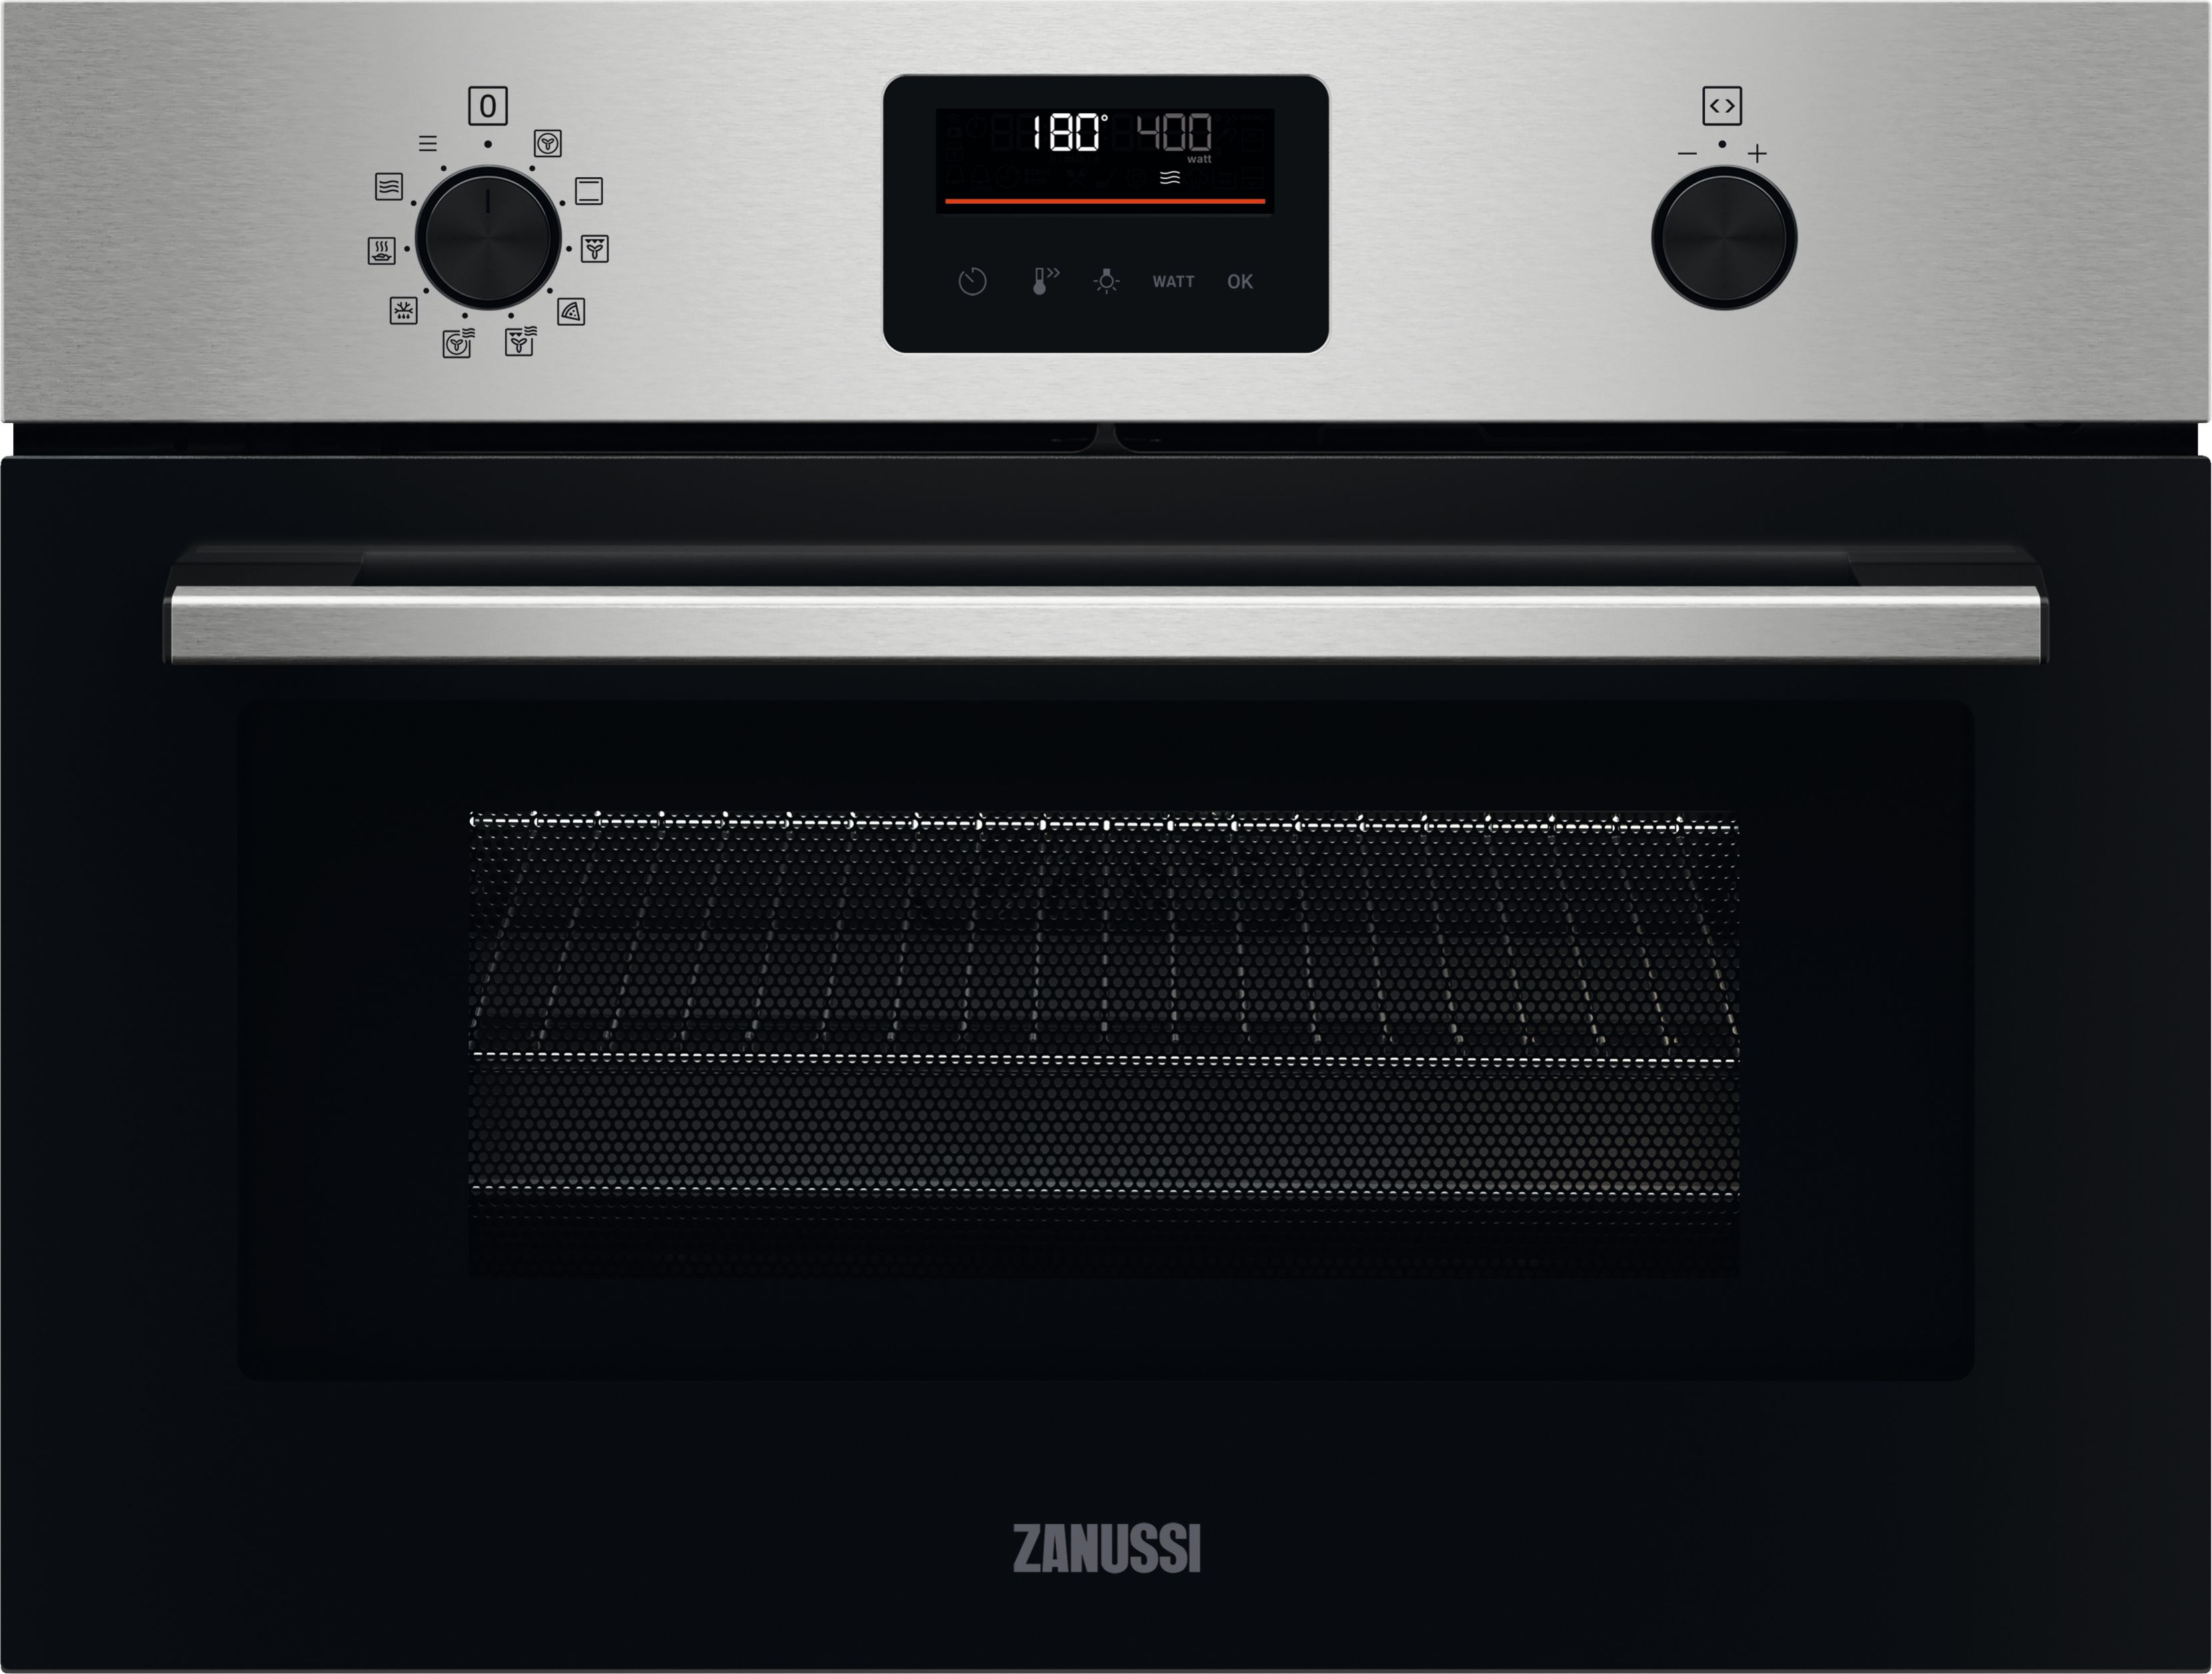 Zanussi ZVENM6X3 Built In Compact Electric Single Oven with Microwave Function - Stainless Steel, Stainless Steel